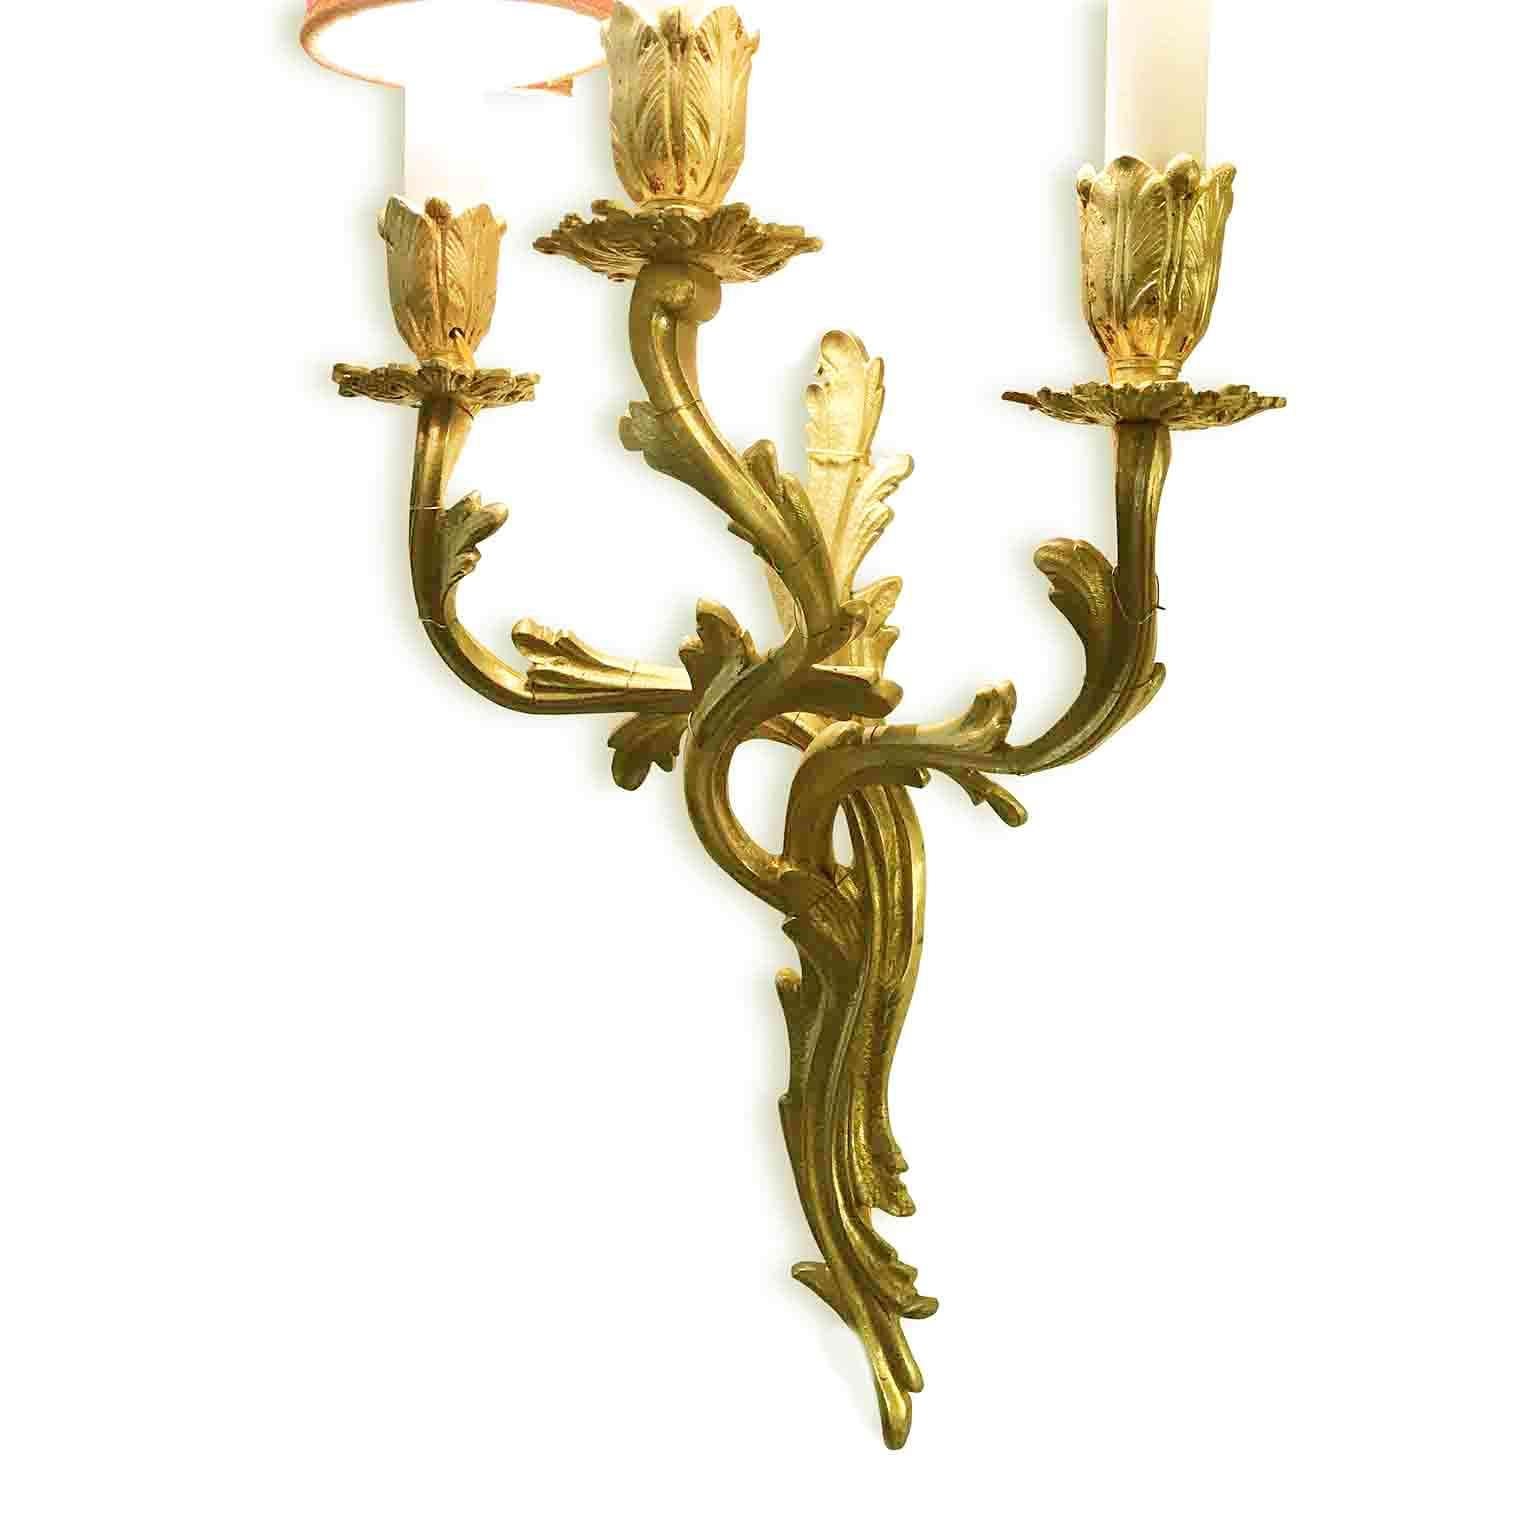 20th Century Pair of French Gilt Bronze Sconces Louis XV Style Three-armed Wall Candelabra For Sale